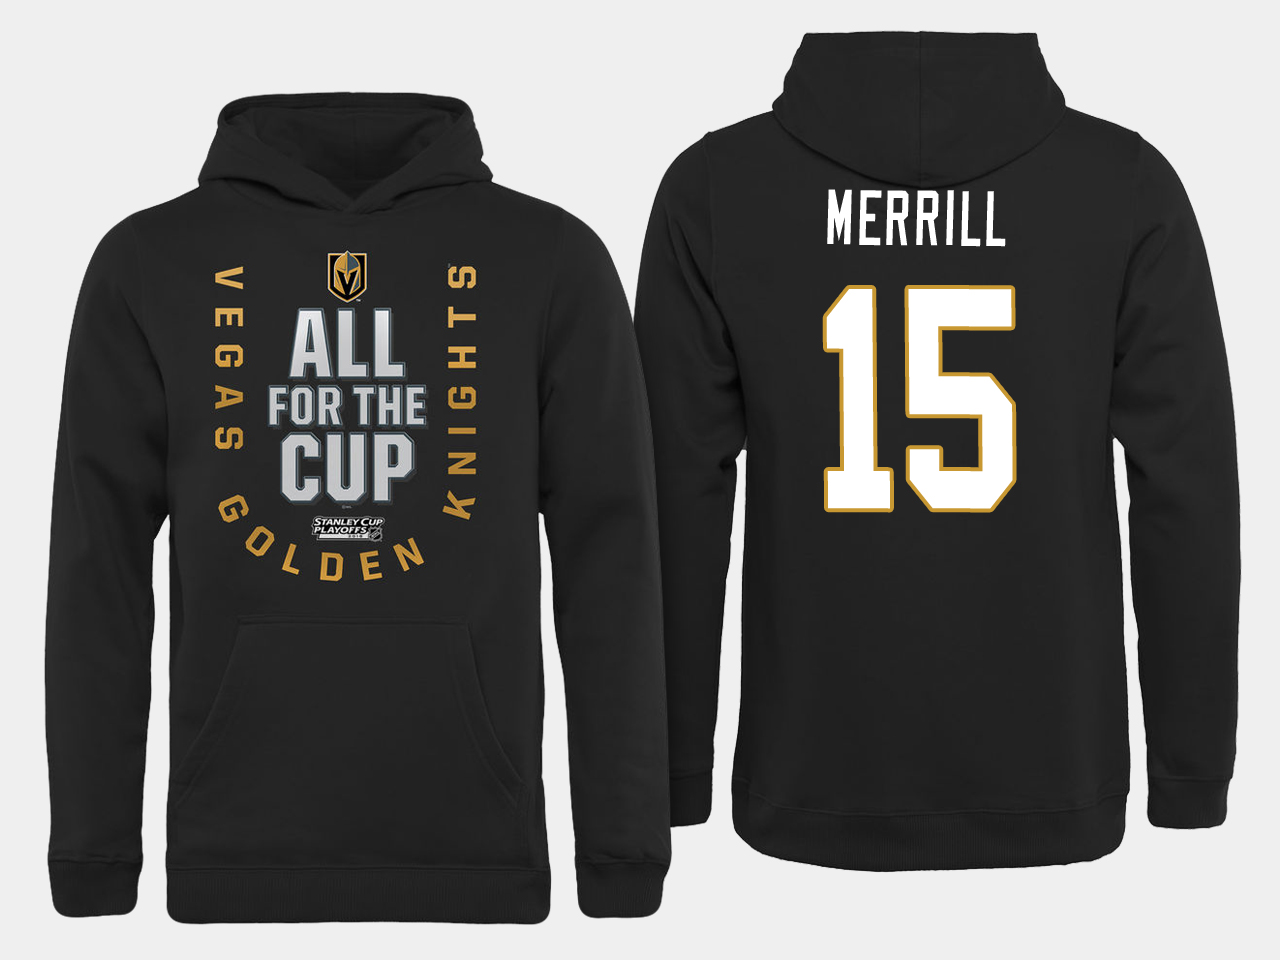 Men NHL Vegas Golden Knights #15 Merrill All for the Cup hoodie->customized nhl jersey->Custom Jersey